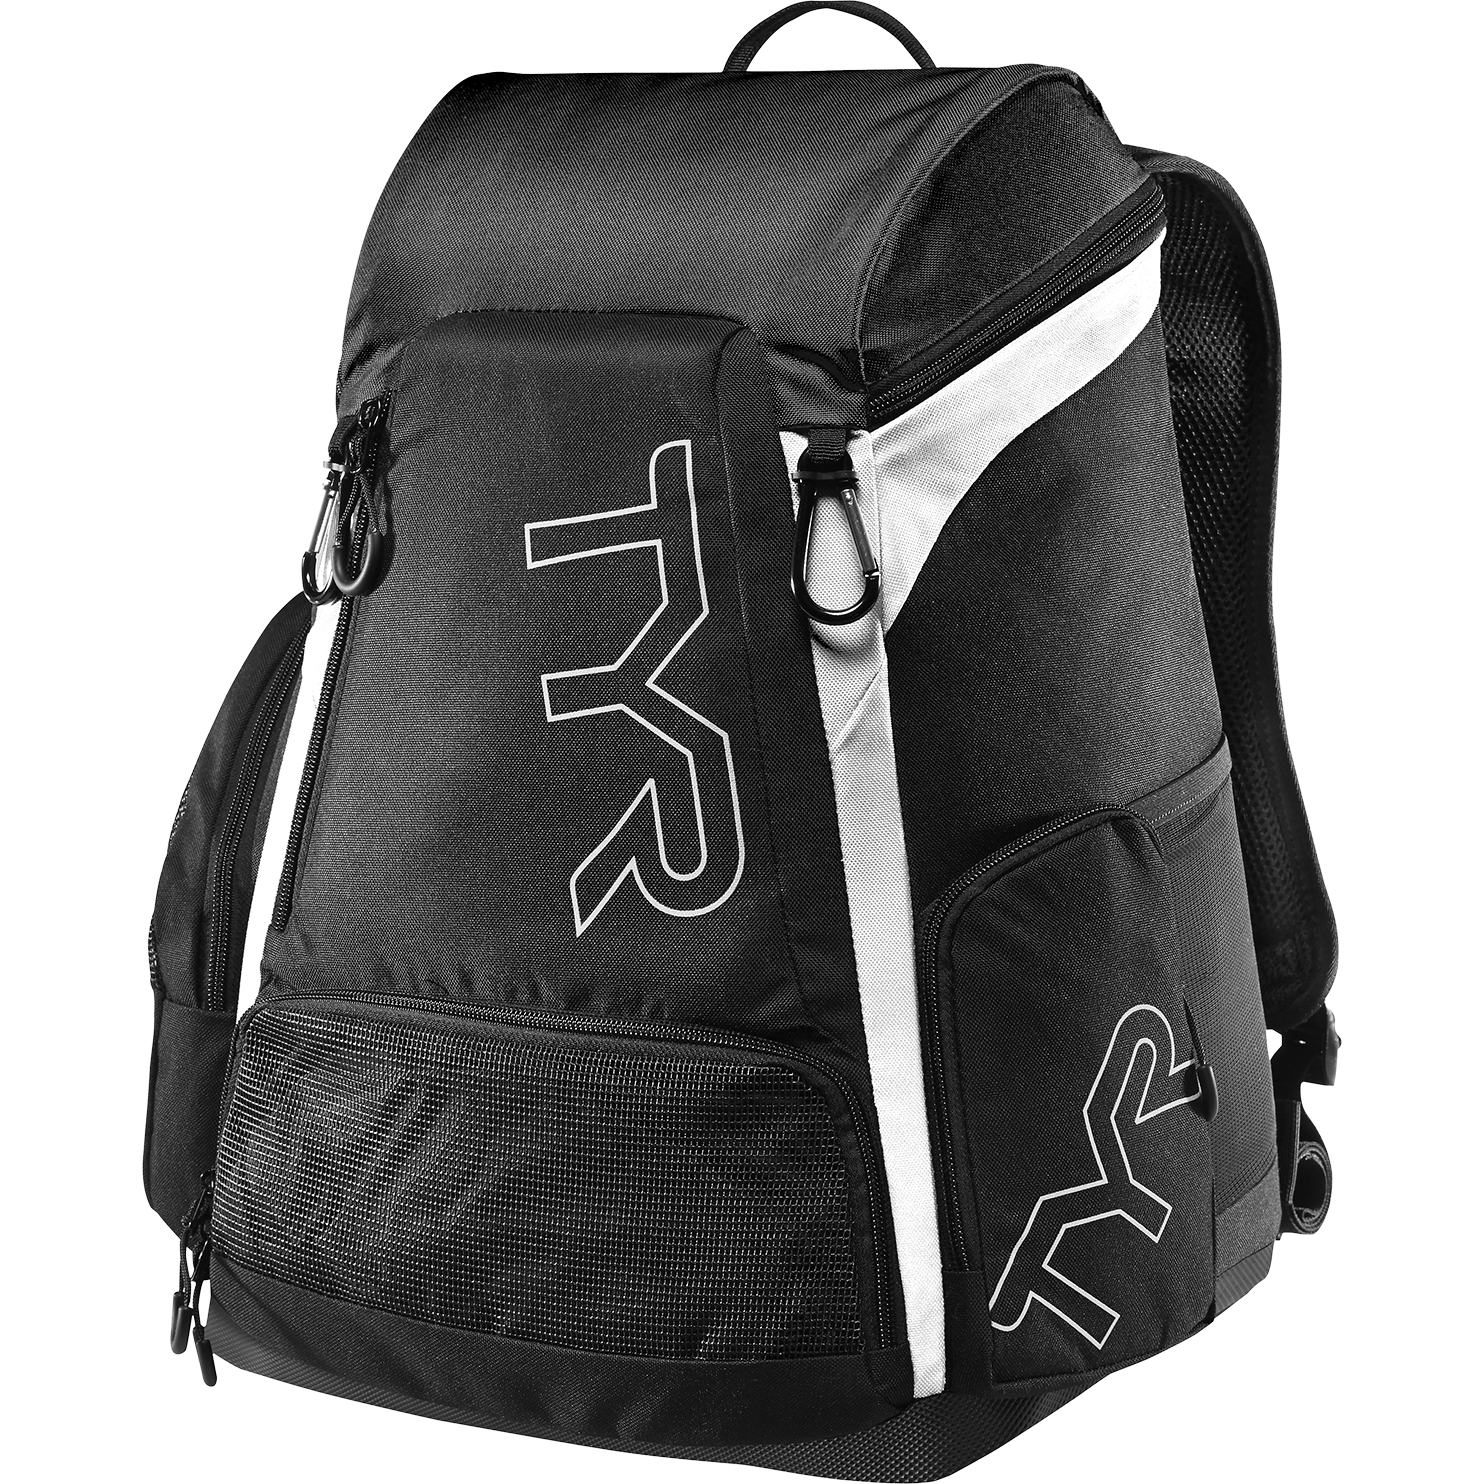 Picture of TYR Alliance 30L Backpack - black/white